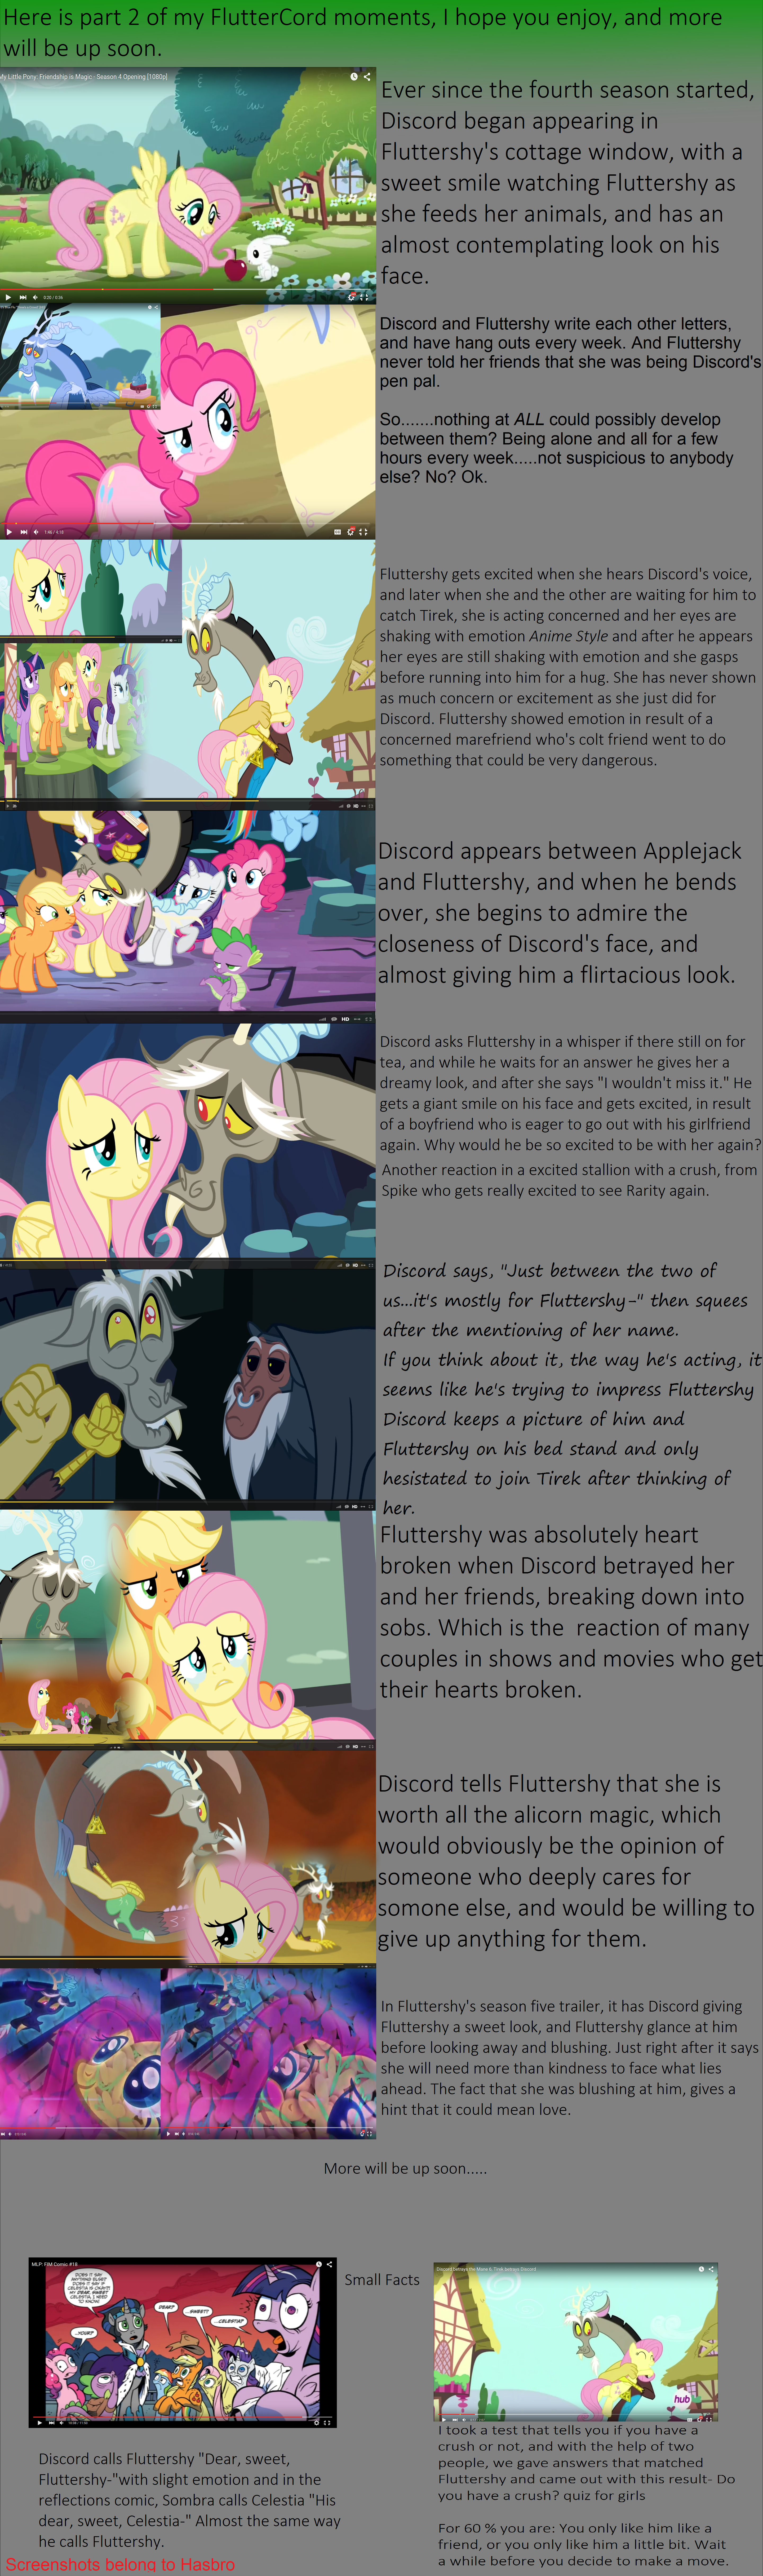 FlutterCord Moments Part 2/2 (Edited)